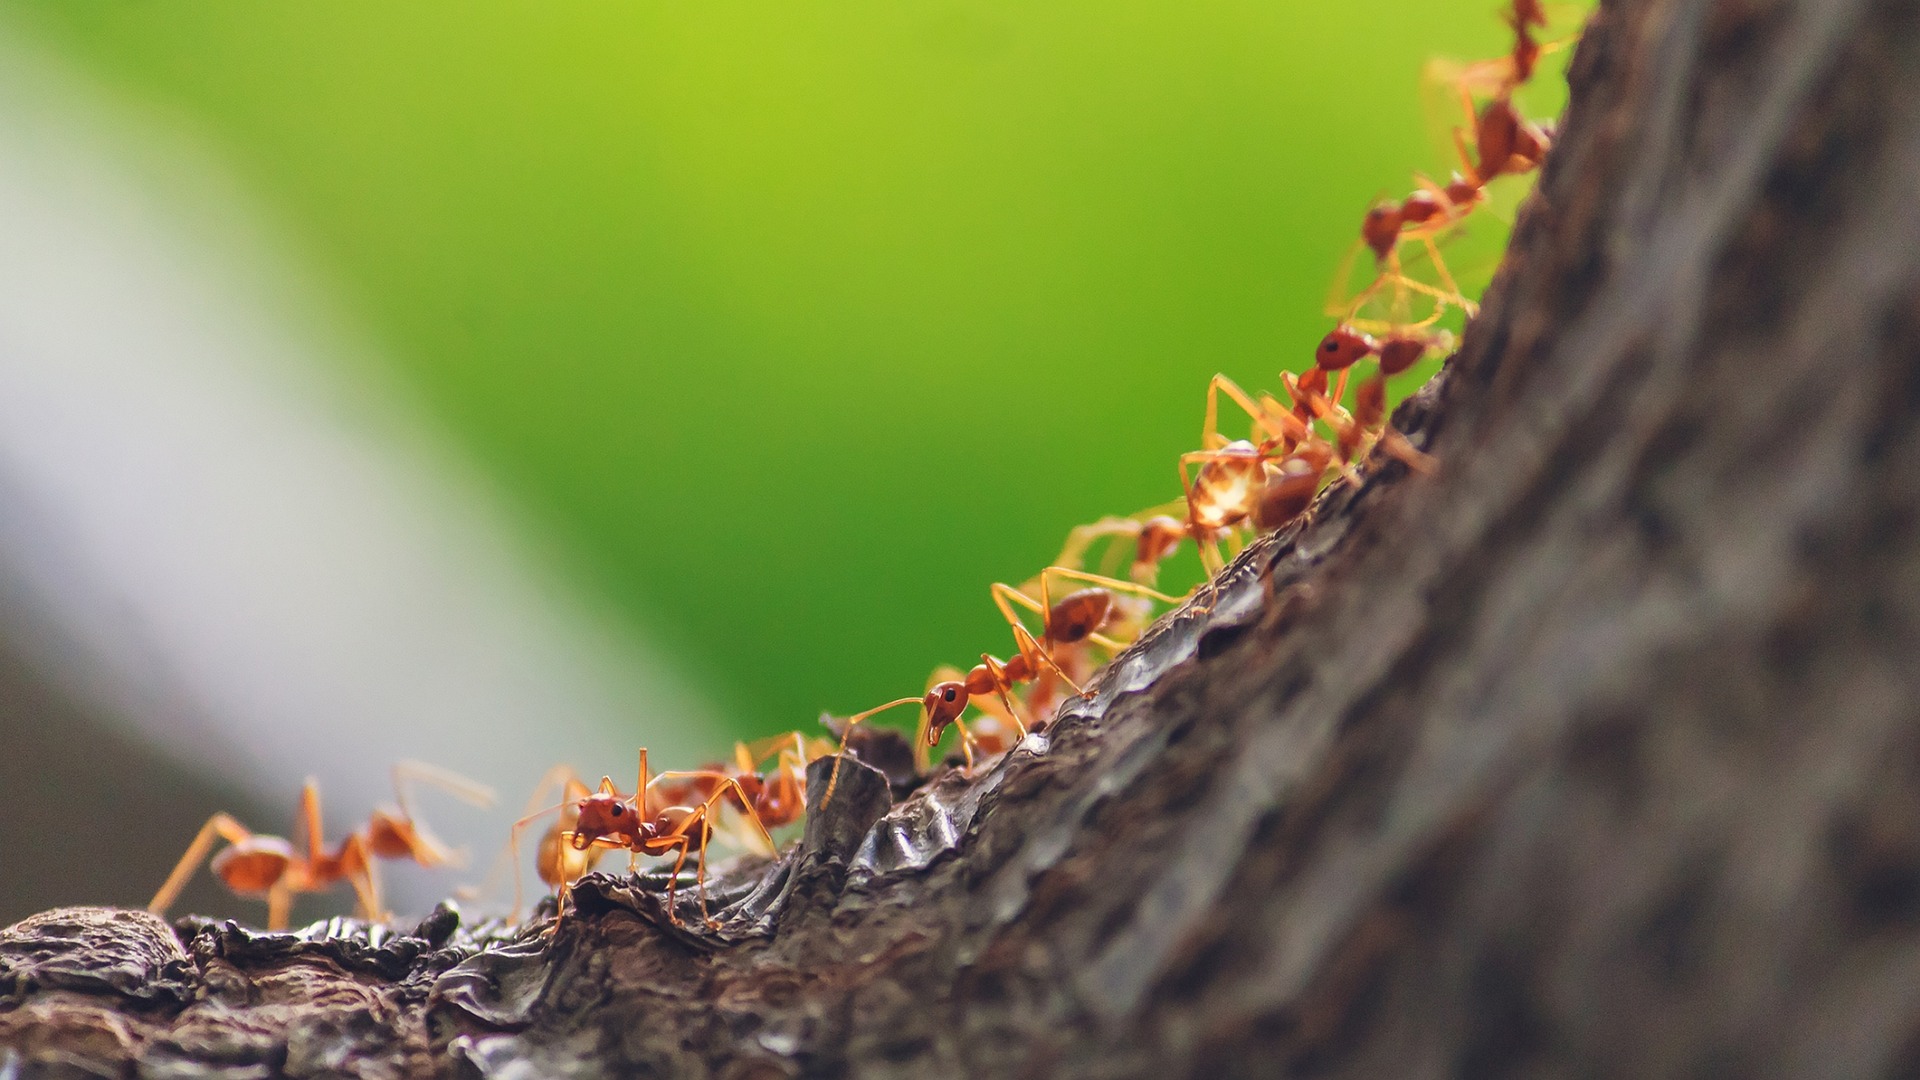 A line of ants crawling on a branch.